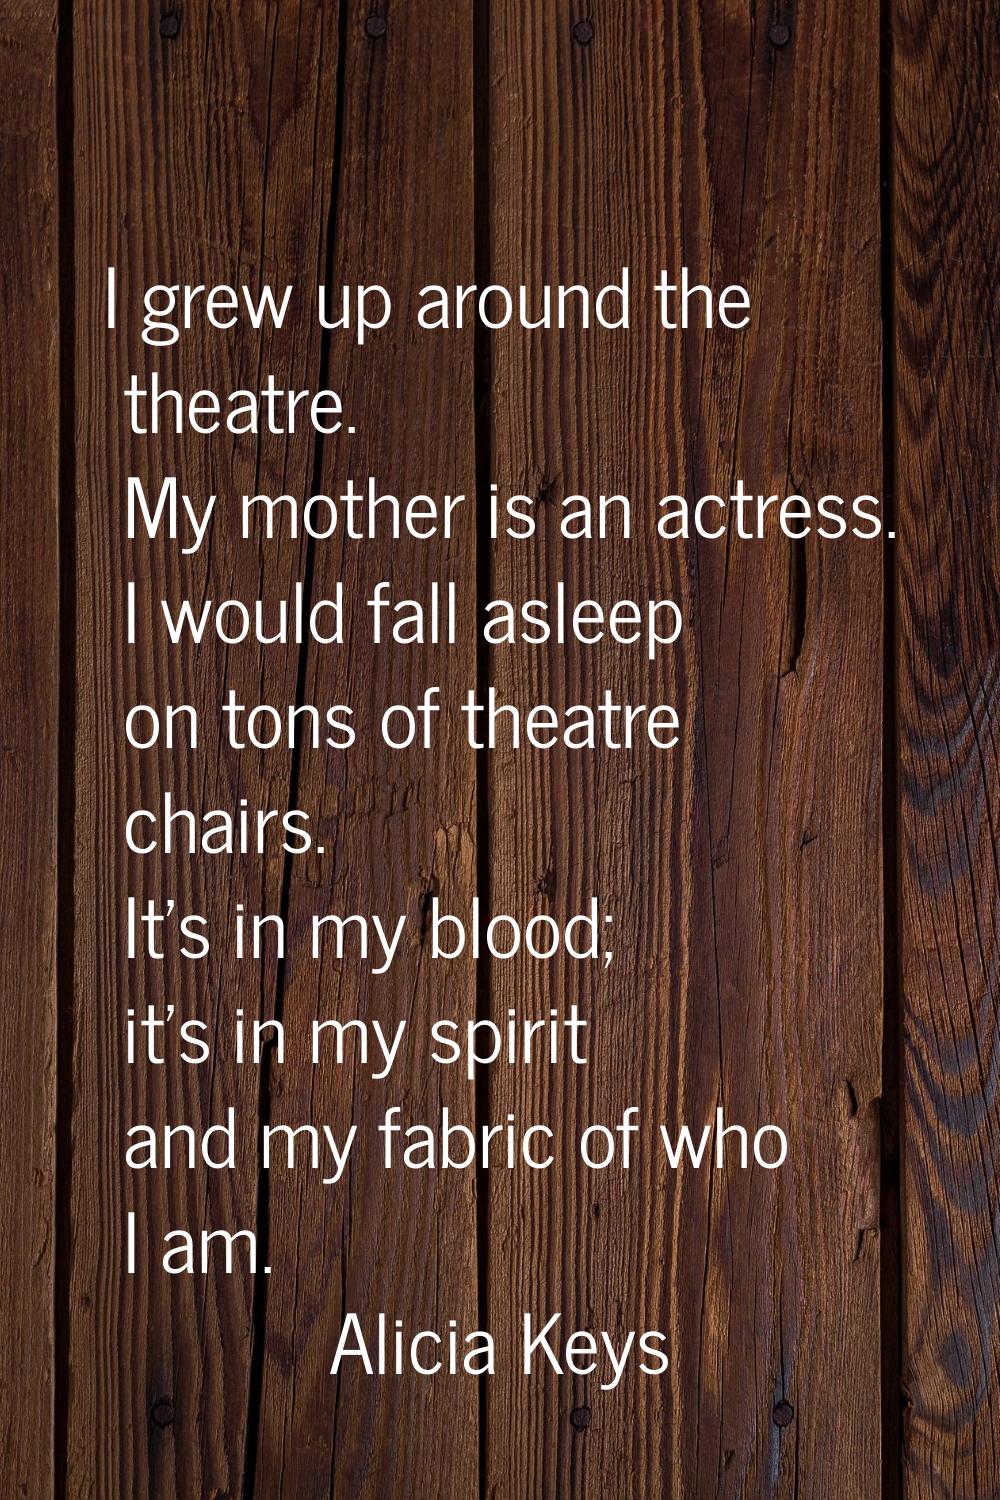 I grew up around the theatre. My mother is an actress. I would fall asleep on tons of theatre chair